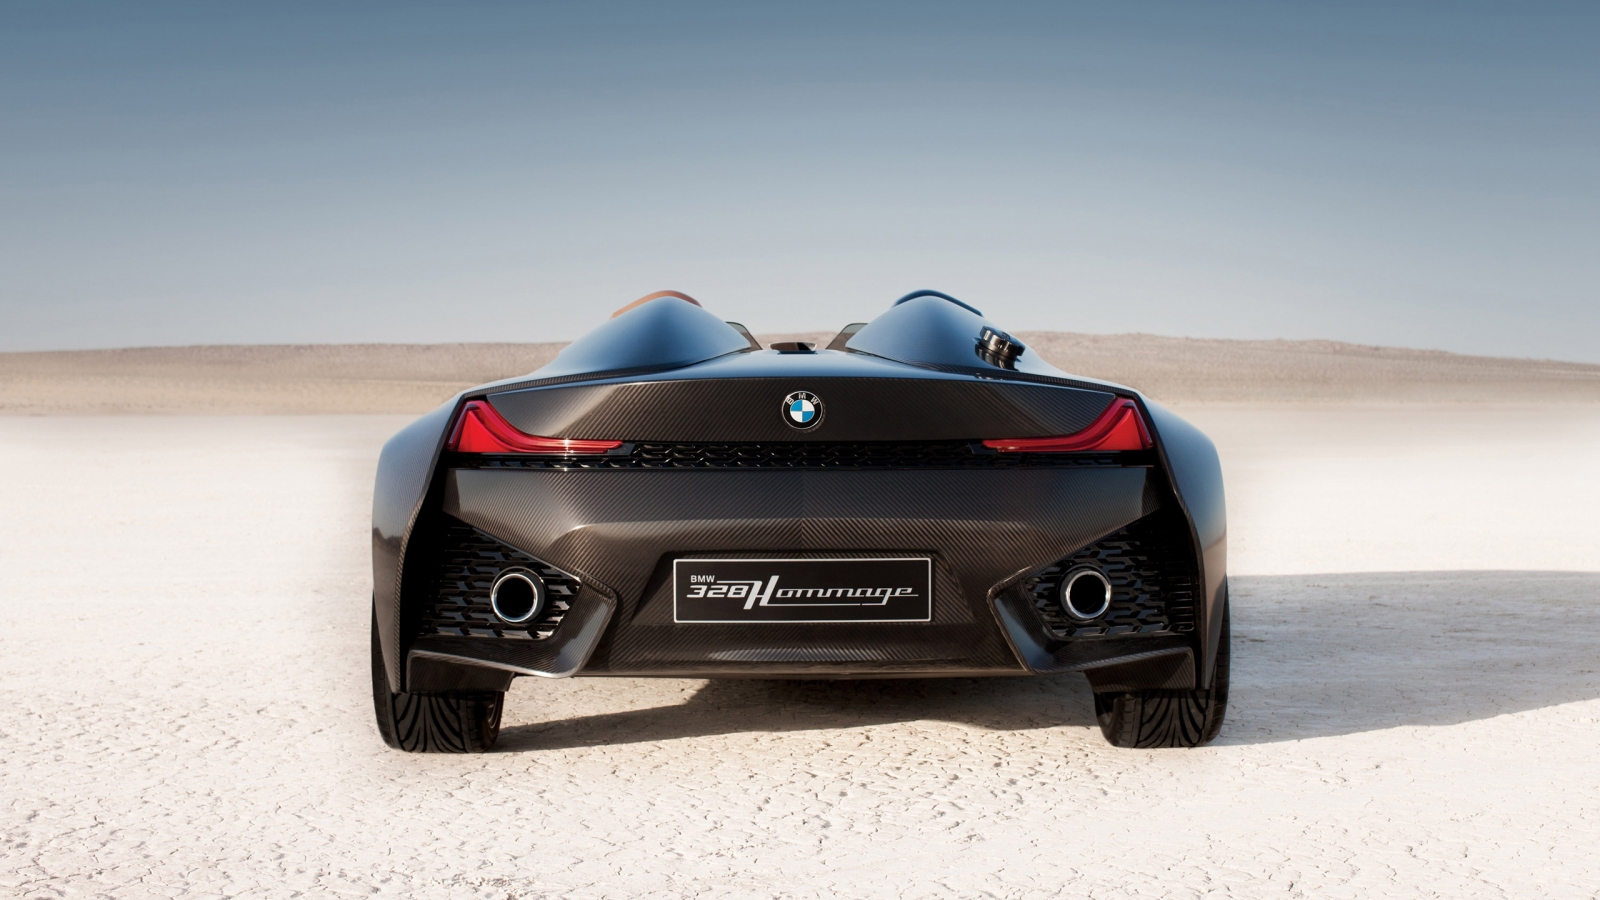 BMW 328 Hommage Rear for 1600 x 900 HDTV resolution